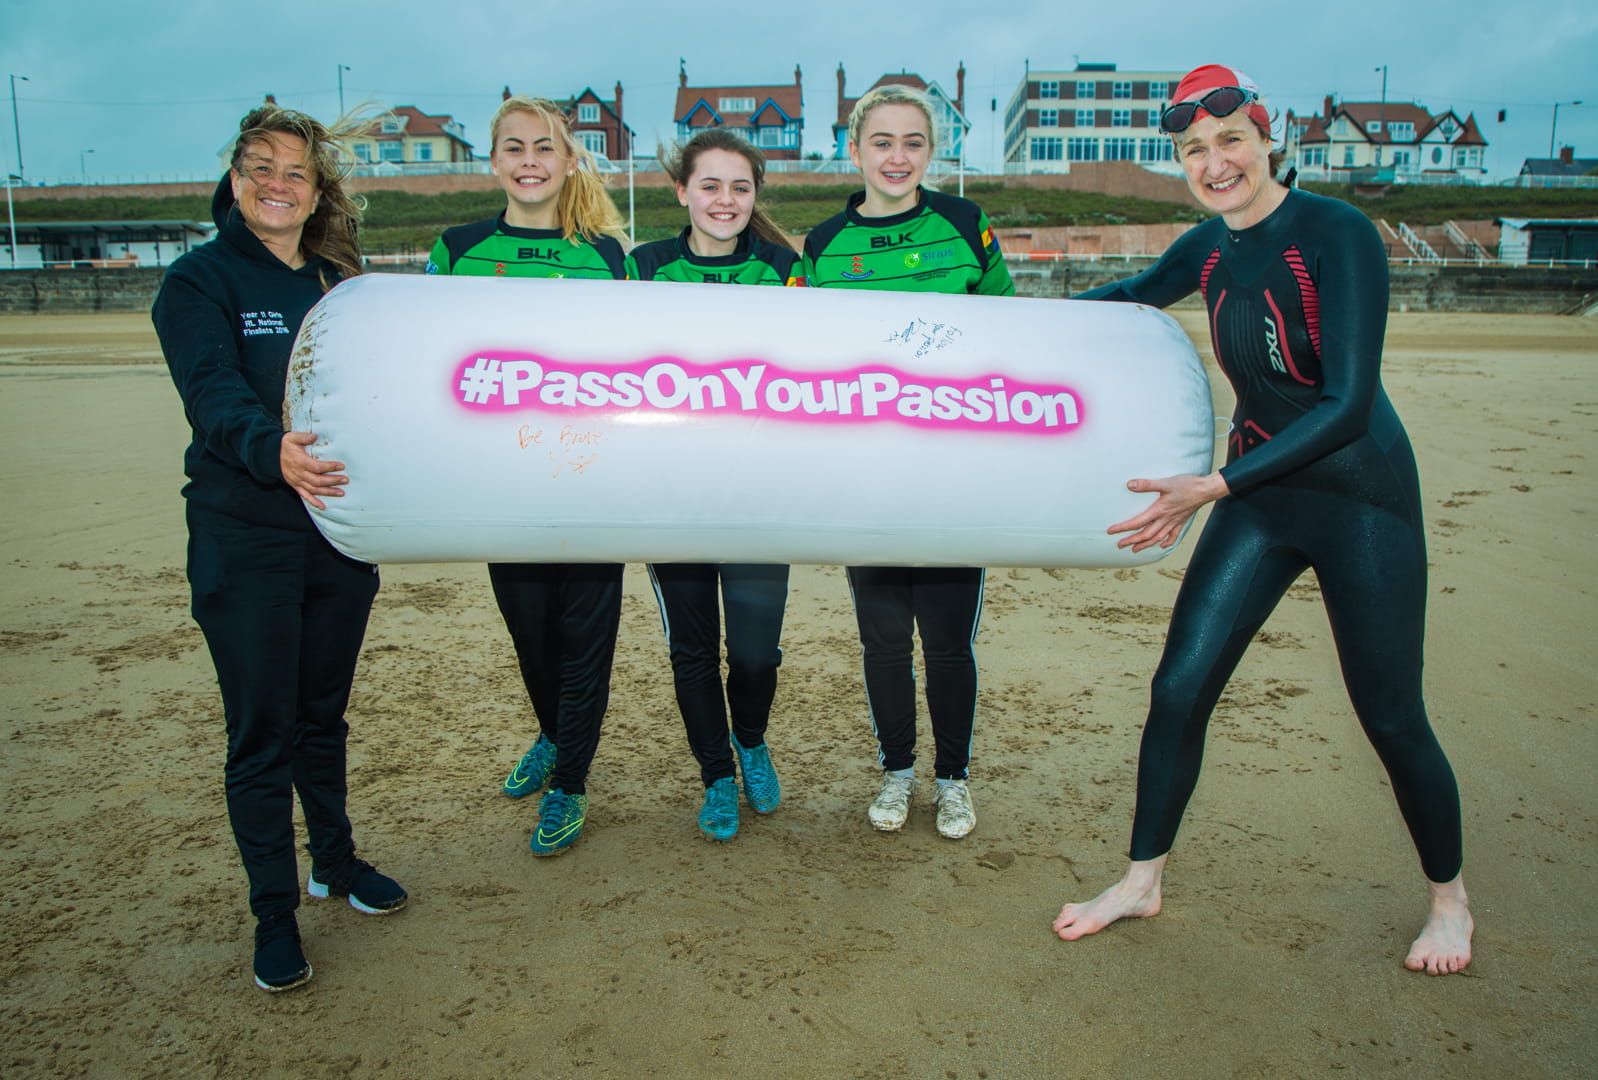 Female coaches on beach passing on inflatable batton